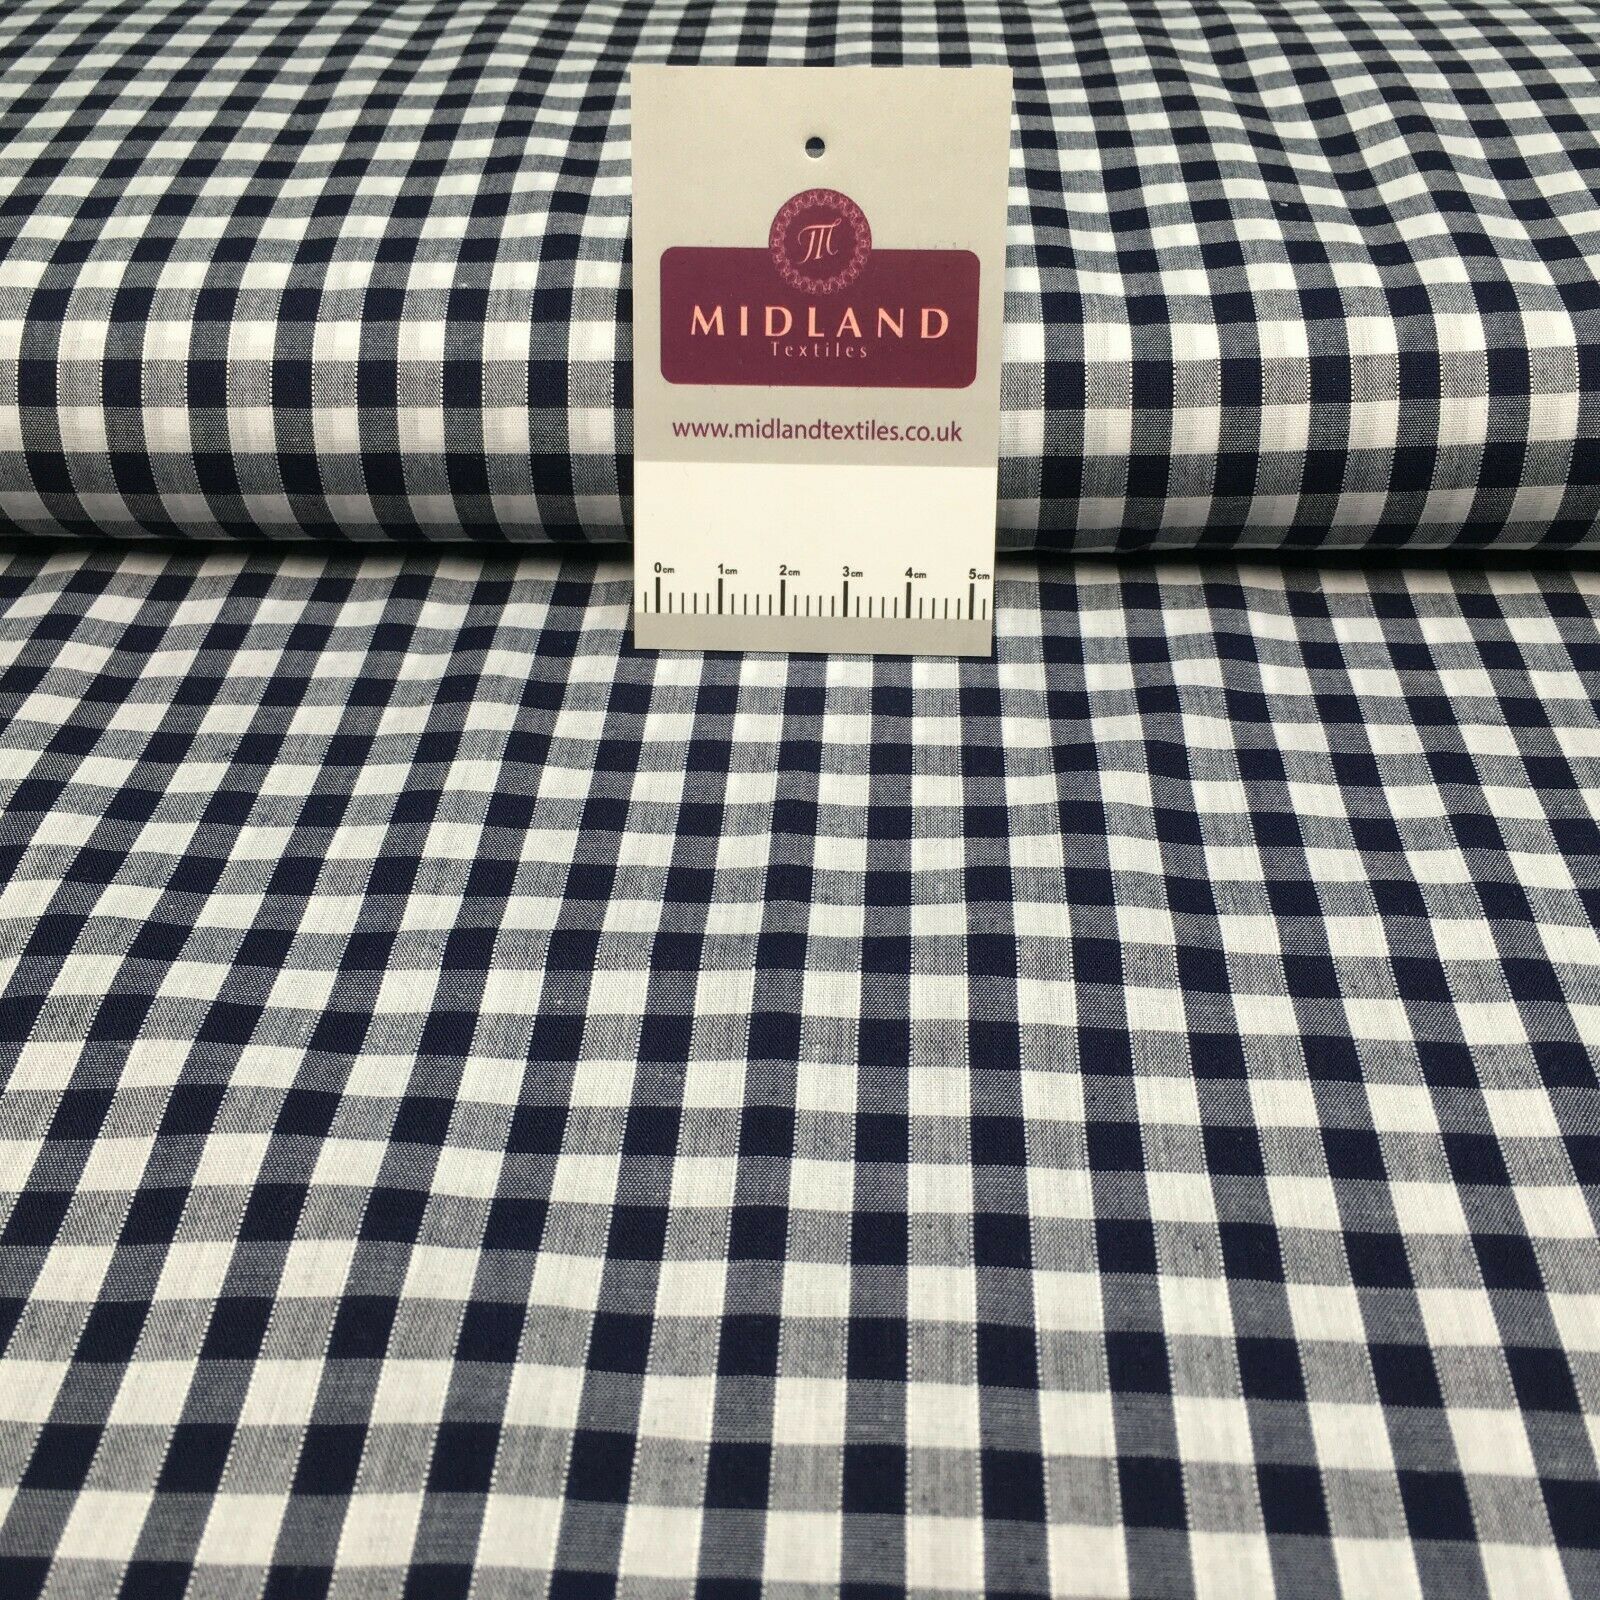 1/4 Gingham Check Corded Gingham Dress Fabric, aprons, tablecloth  M1542